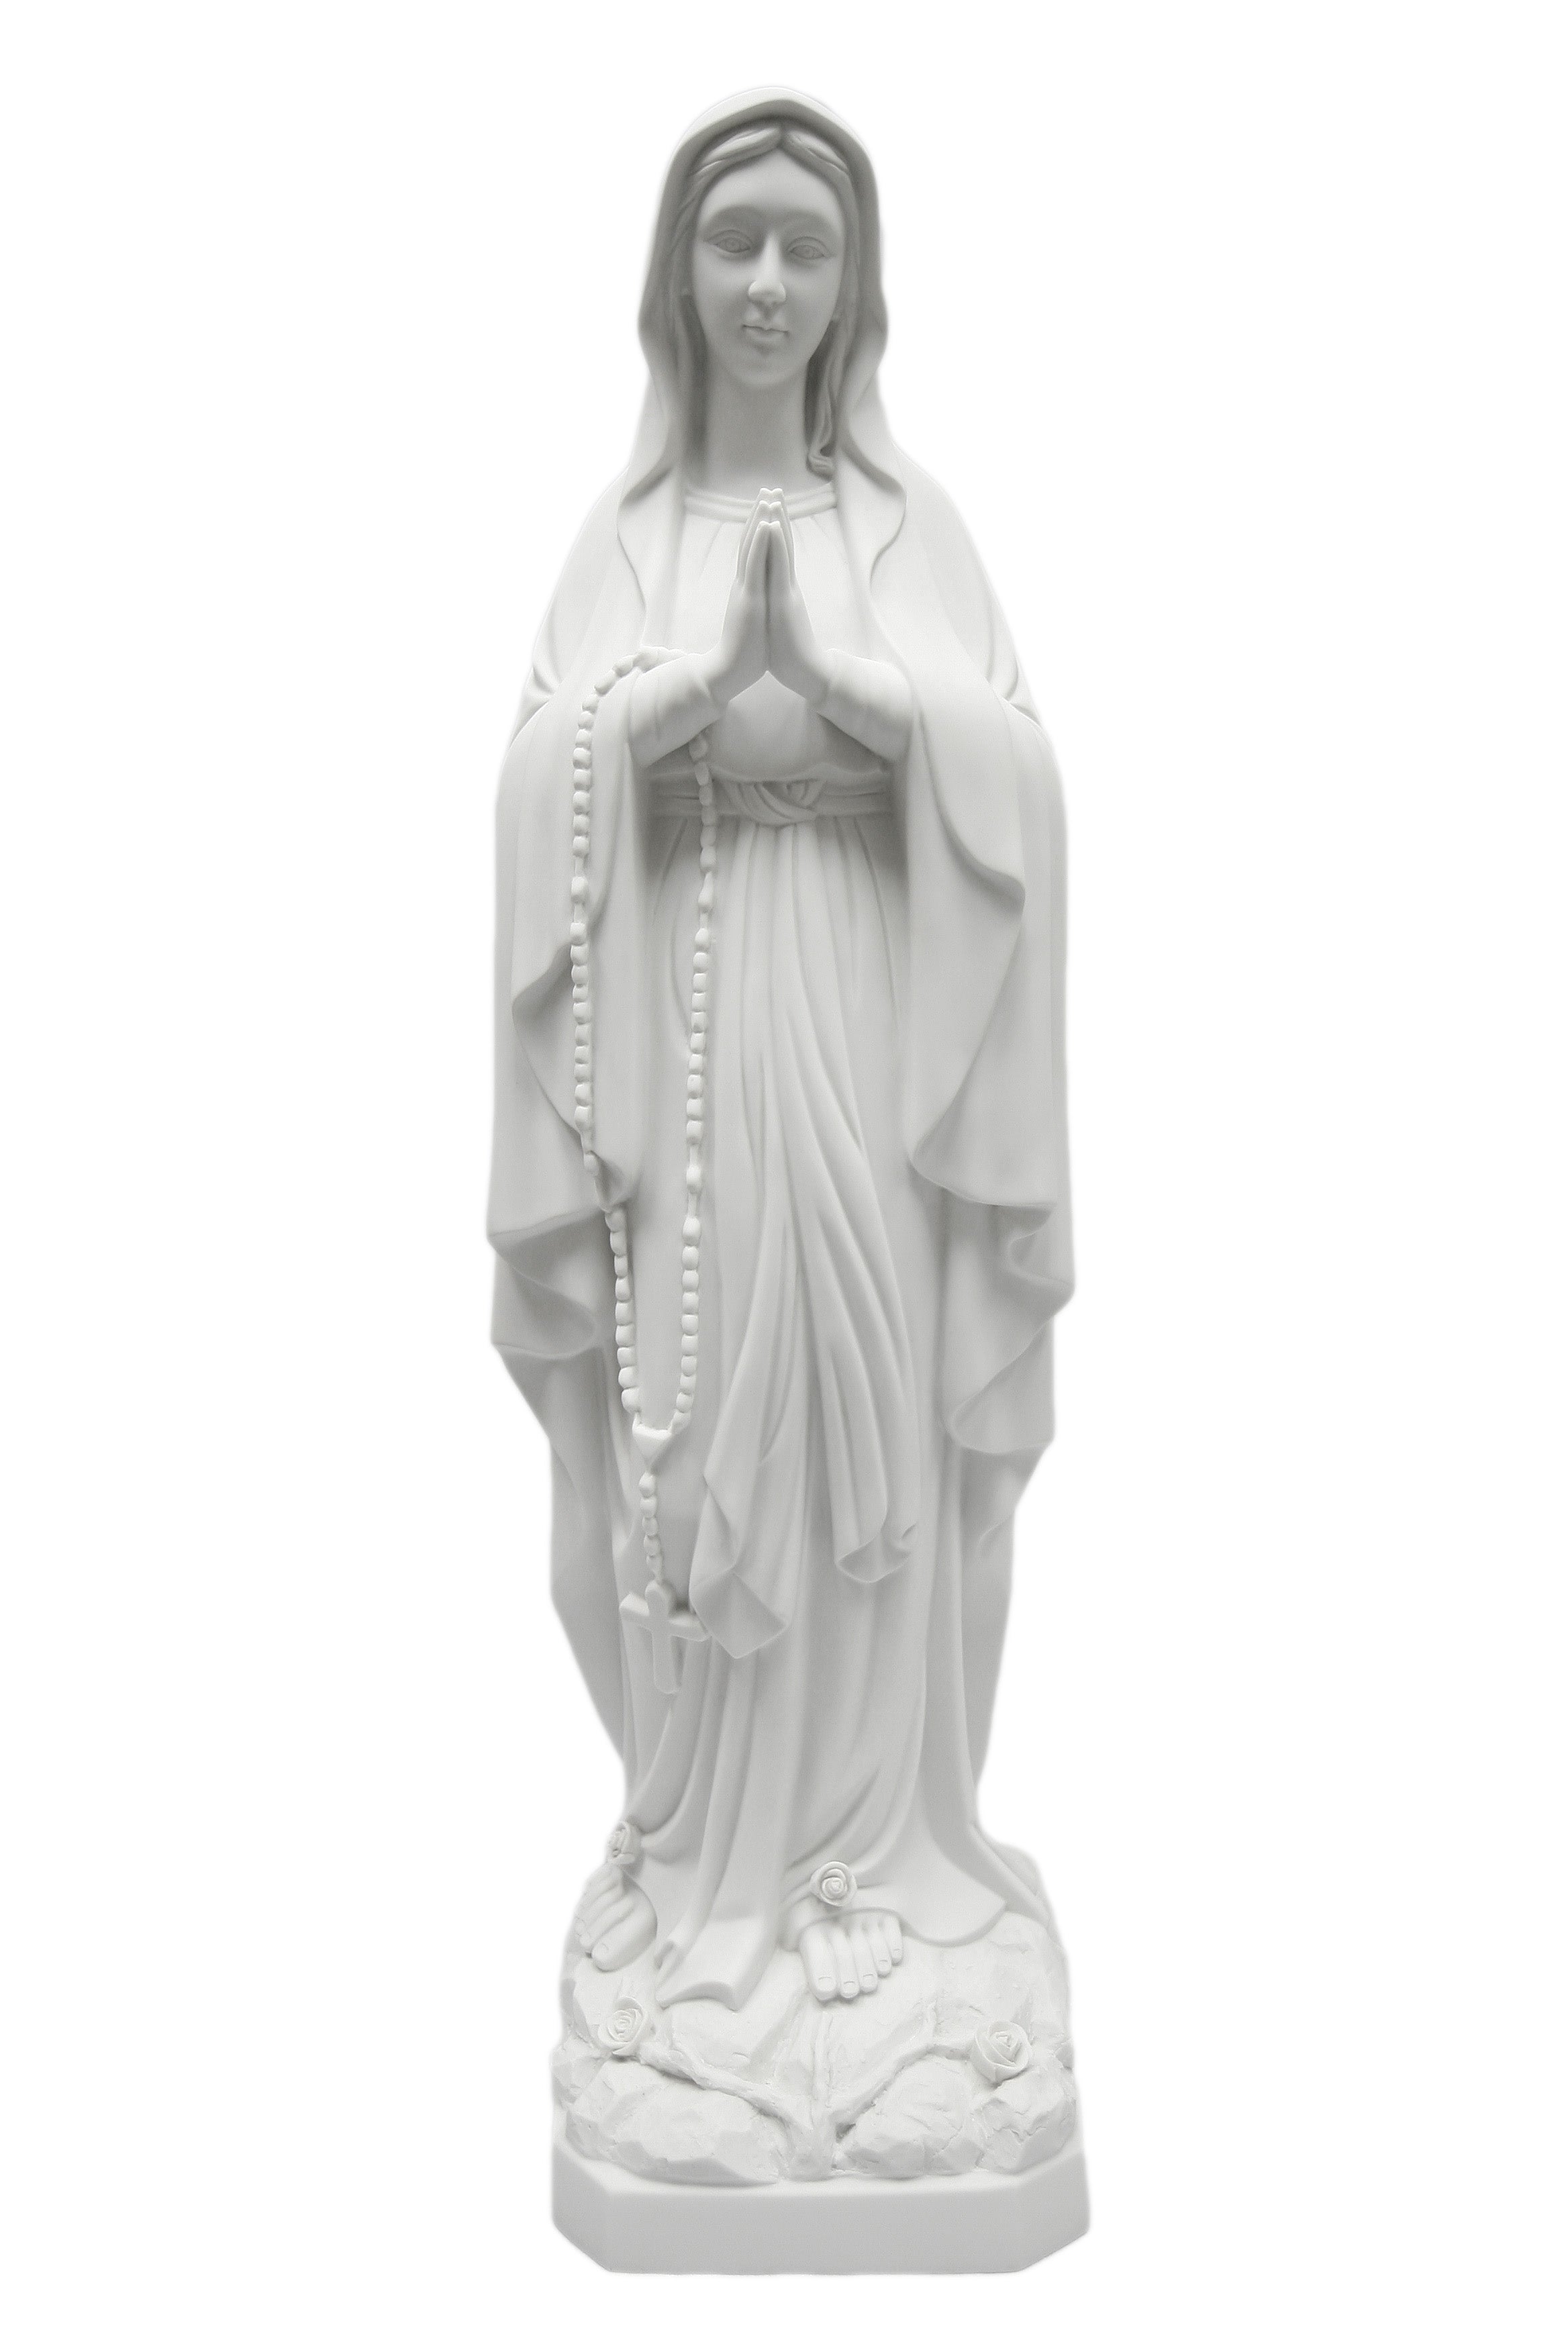 38 Inch Our Lady of Lourdes Virgin Mary Catholic Statue Sculpture Vittoria Collection Made in Italy